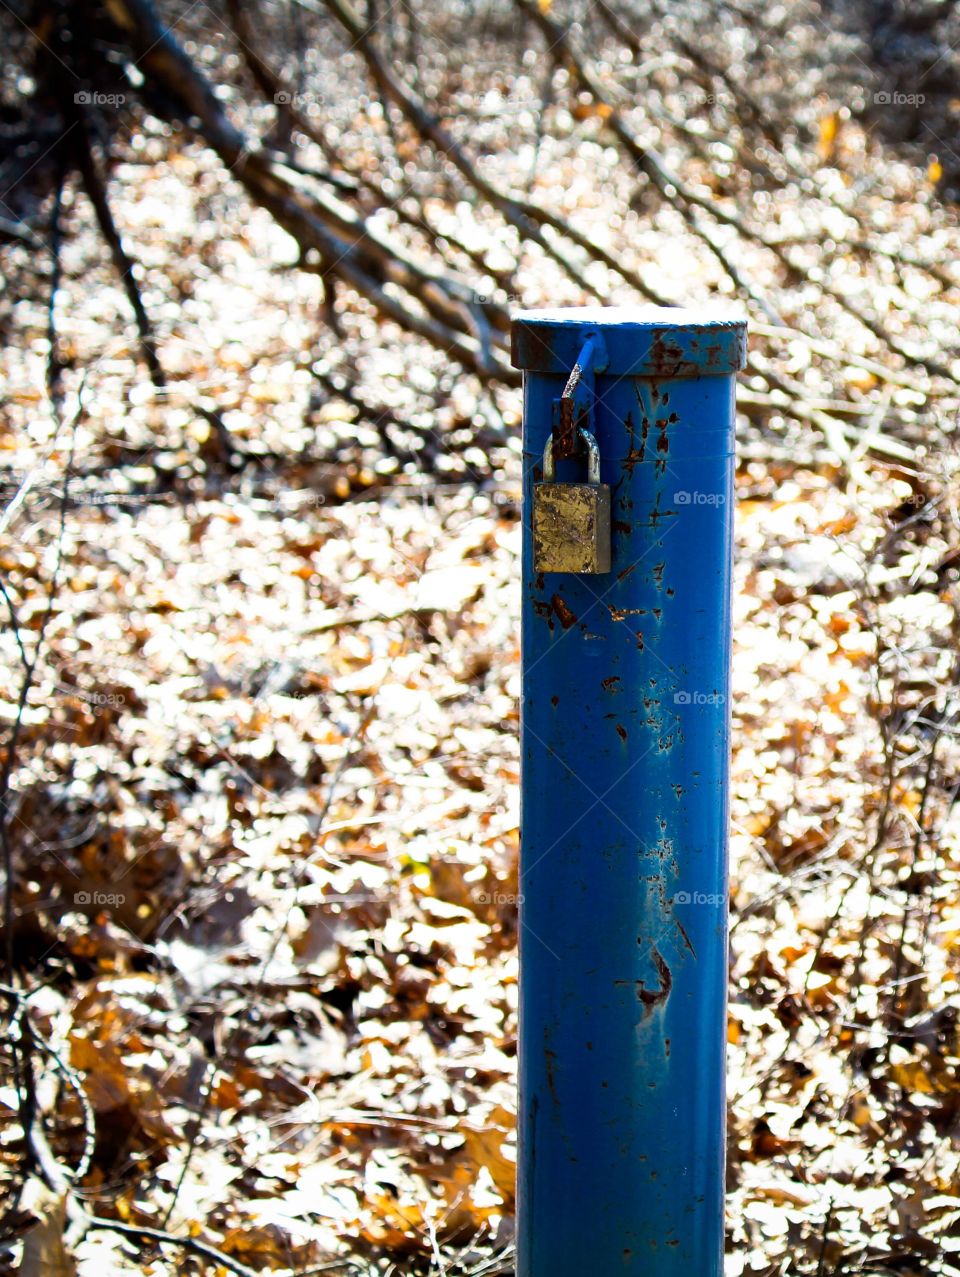 A lone pole in the woods with a lock. There are scenic colors and a sense of mystery hidden in here. 